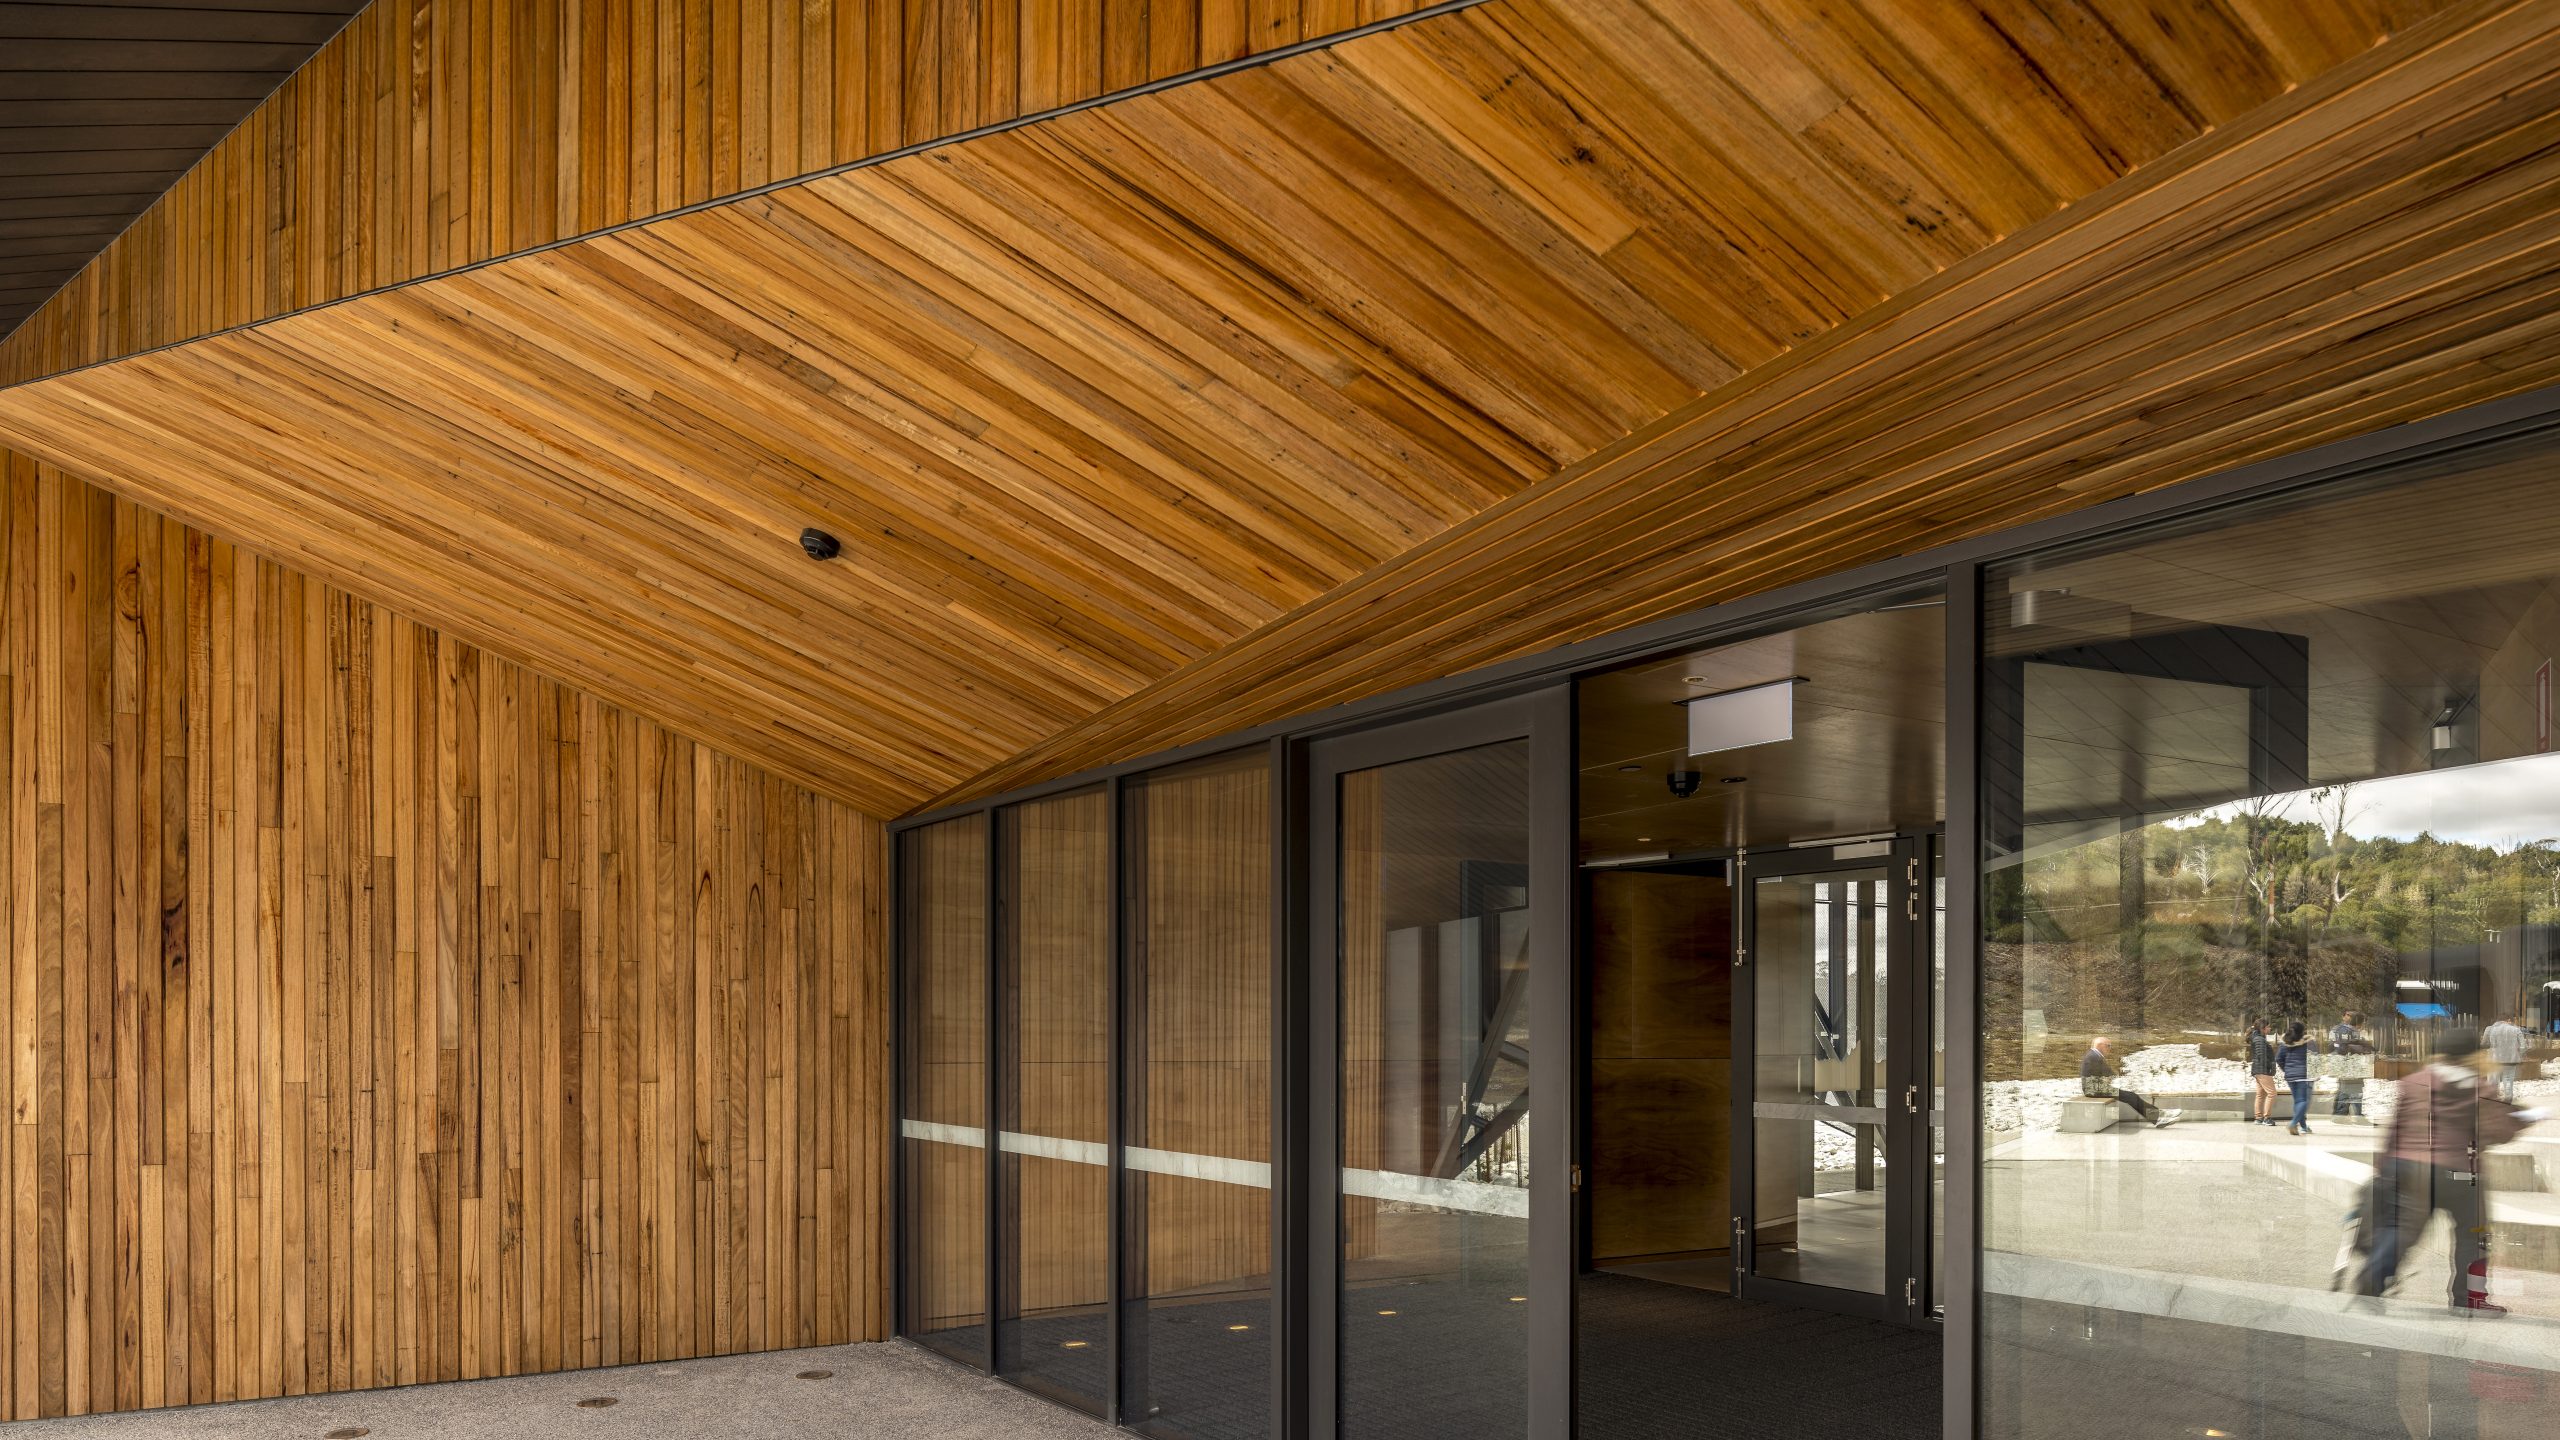 Trend plank Timbers battens Used at Cradle Mountain Visitor Center.